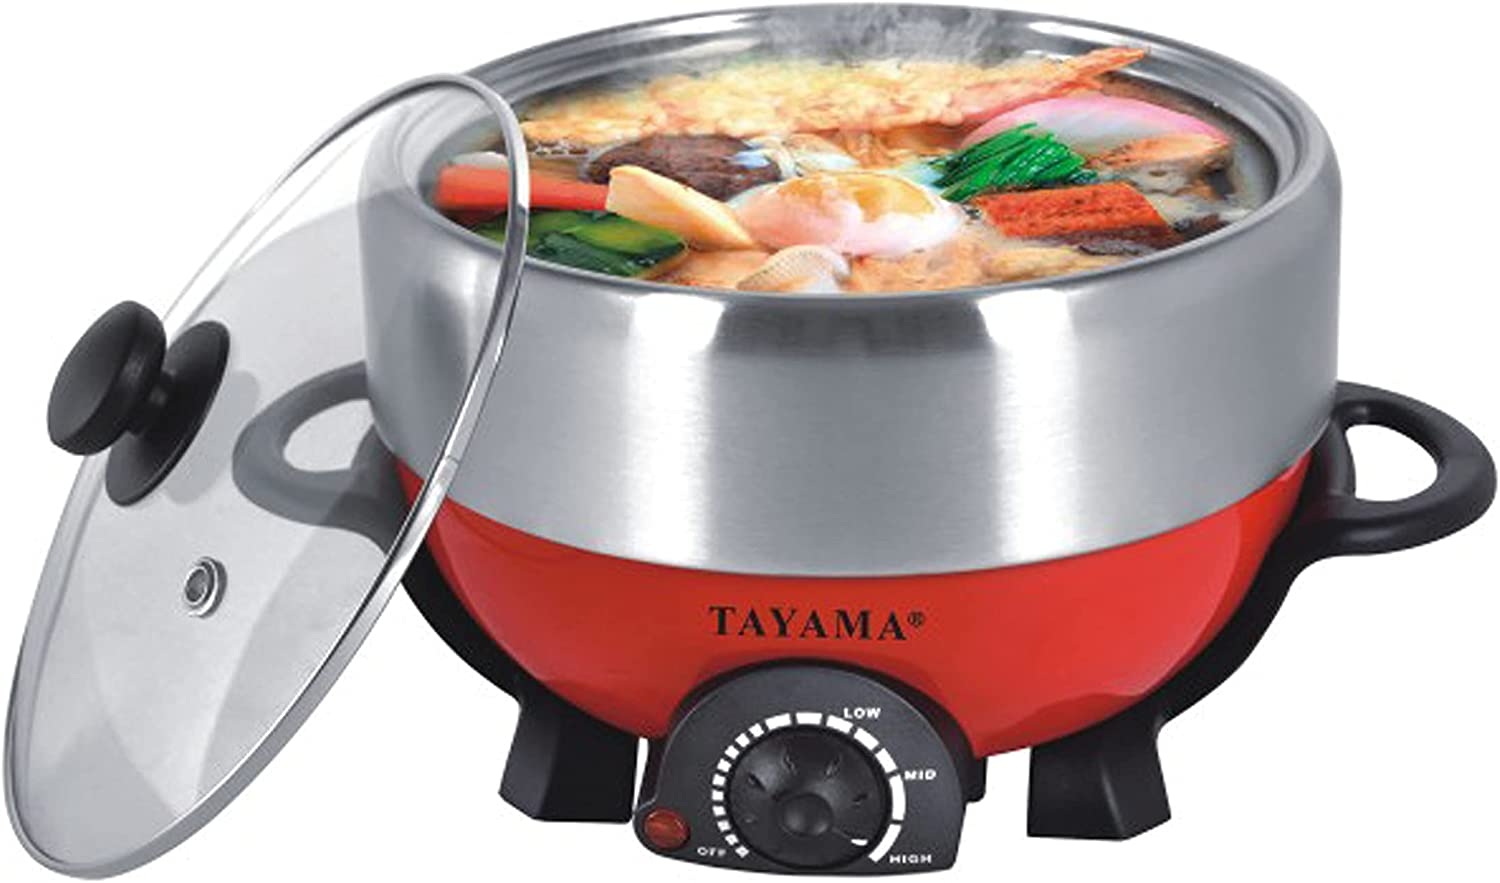 Tayama TRMC-40RS Shabu and Grill 3 Qt. Red Electric Multi-Cooker with Stainless Steel Pot Import To Shop ×Product customization